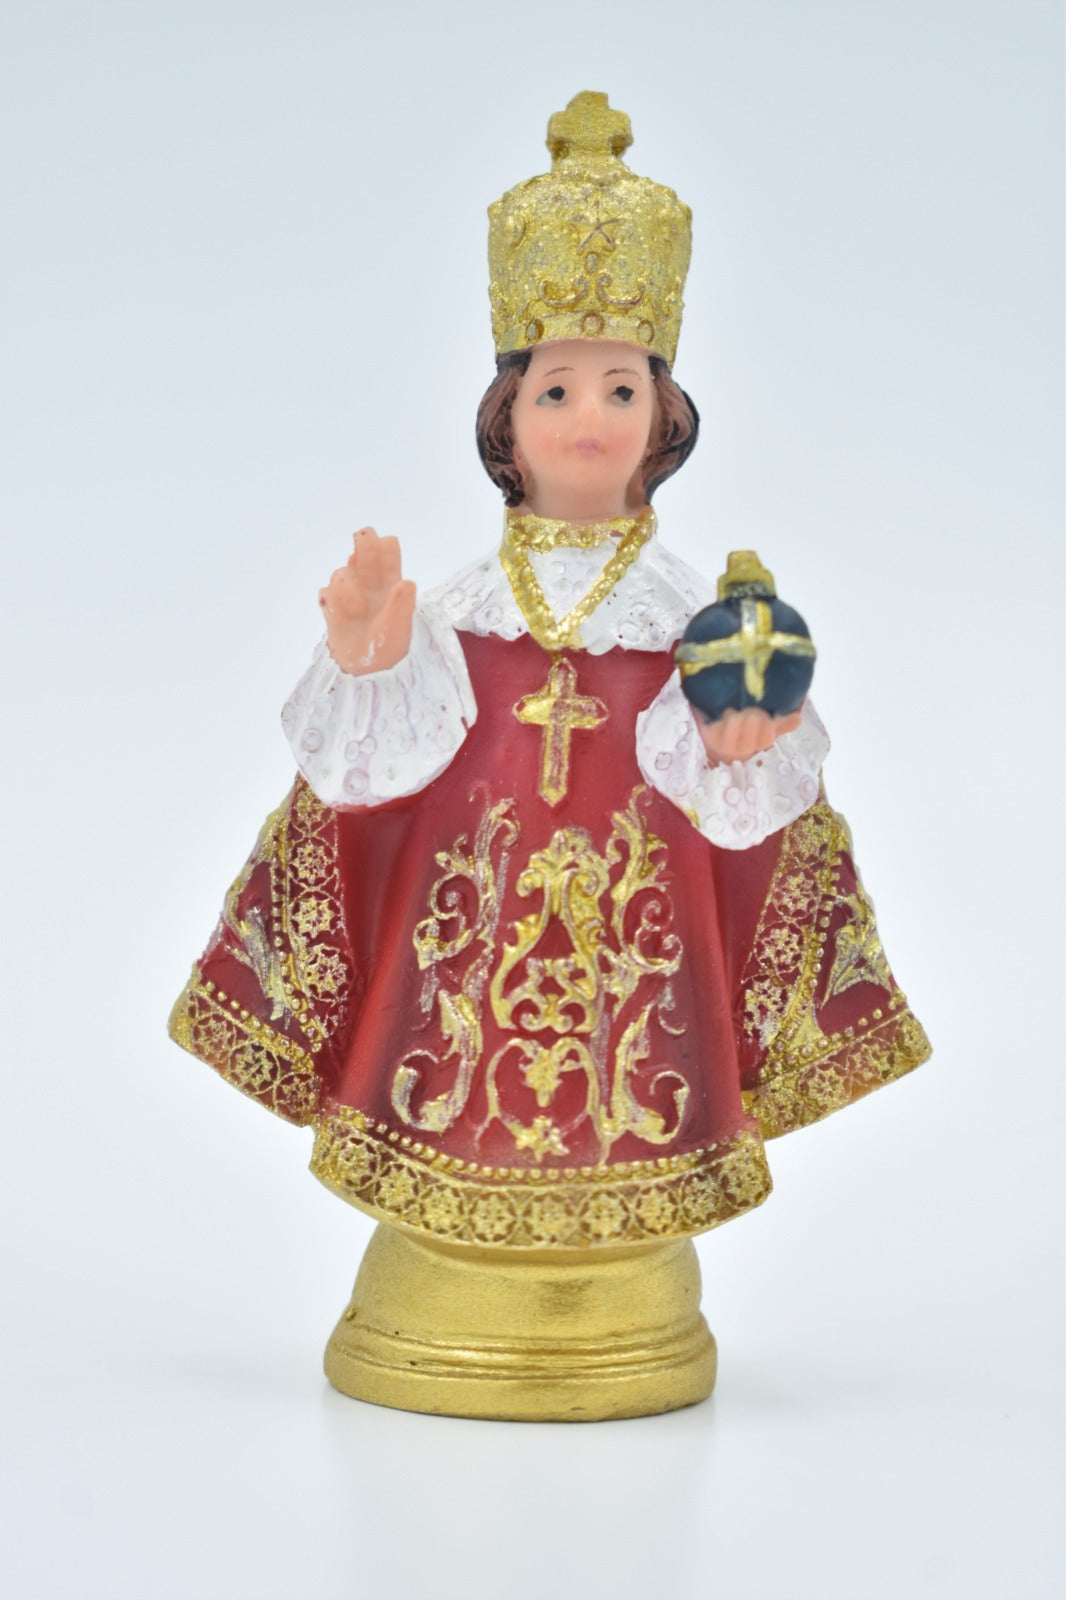 3.5 Inch Infant Jesus Statue - Handcrafted with Love and Devotion ...